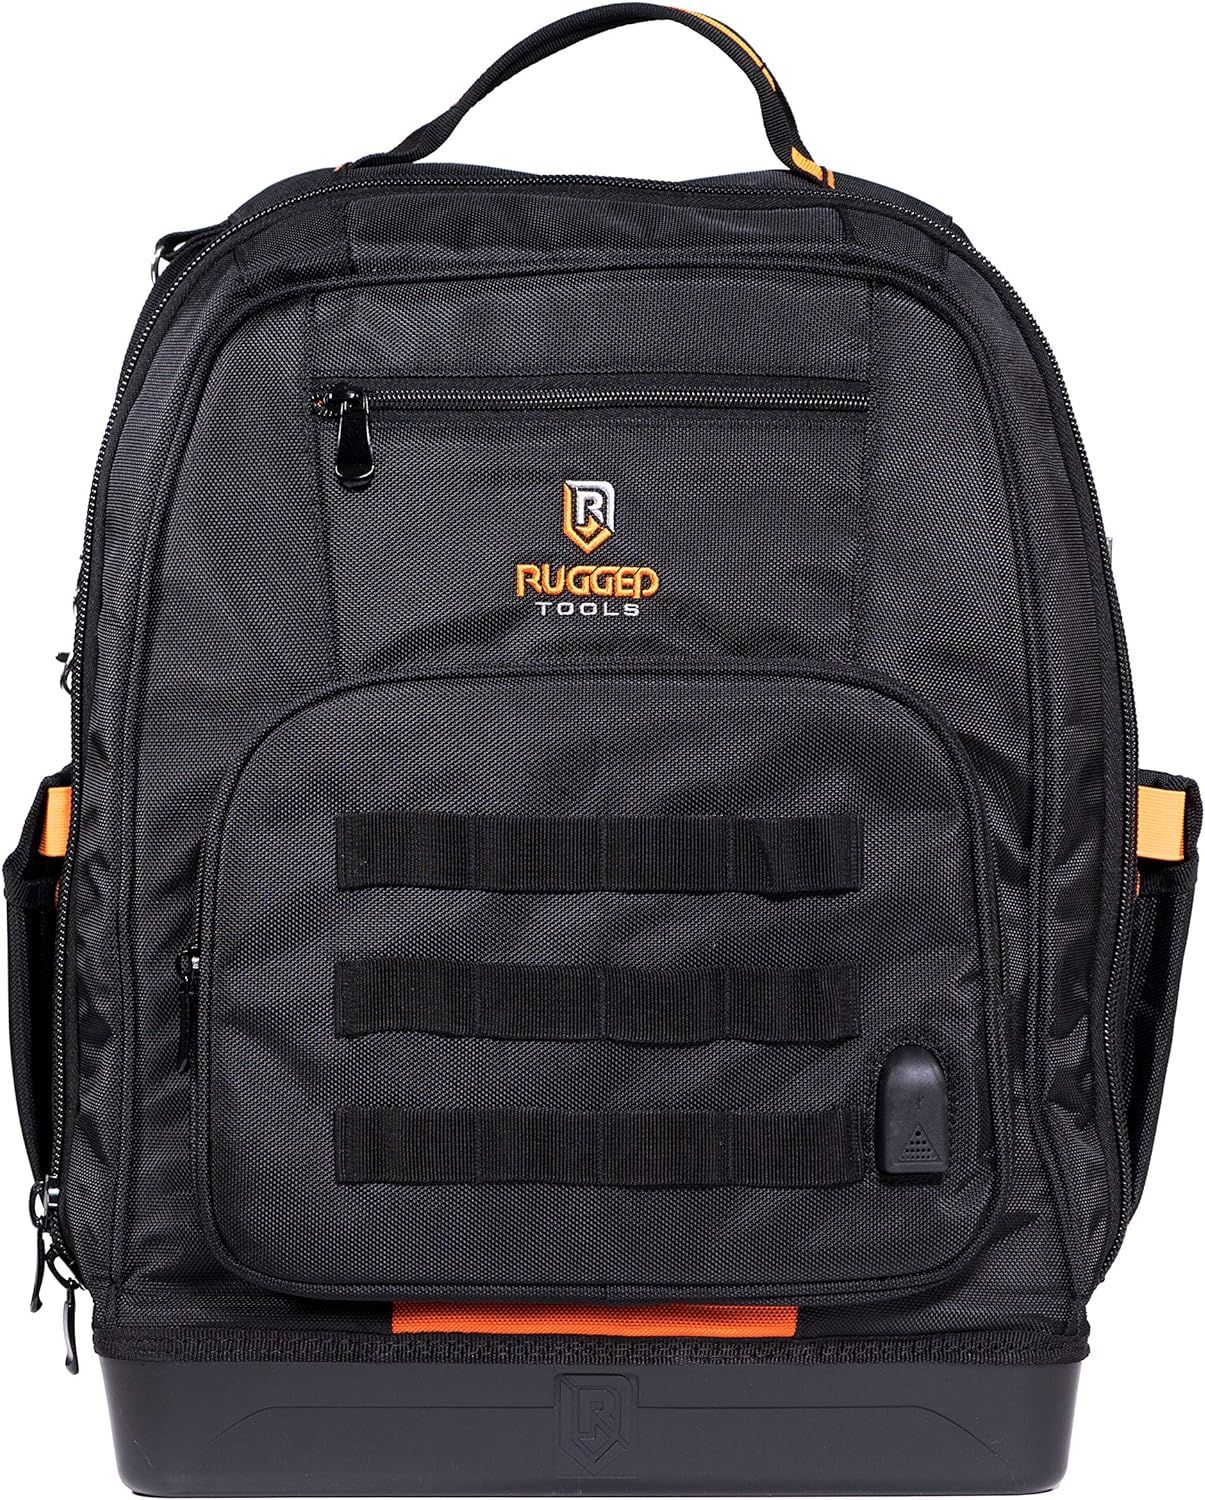 Rugged Tools Worksite Tool Backpack - 68 Pockets & Utility Organizers Including Laptop Sleeve - Heav | Amazon (US)